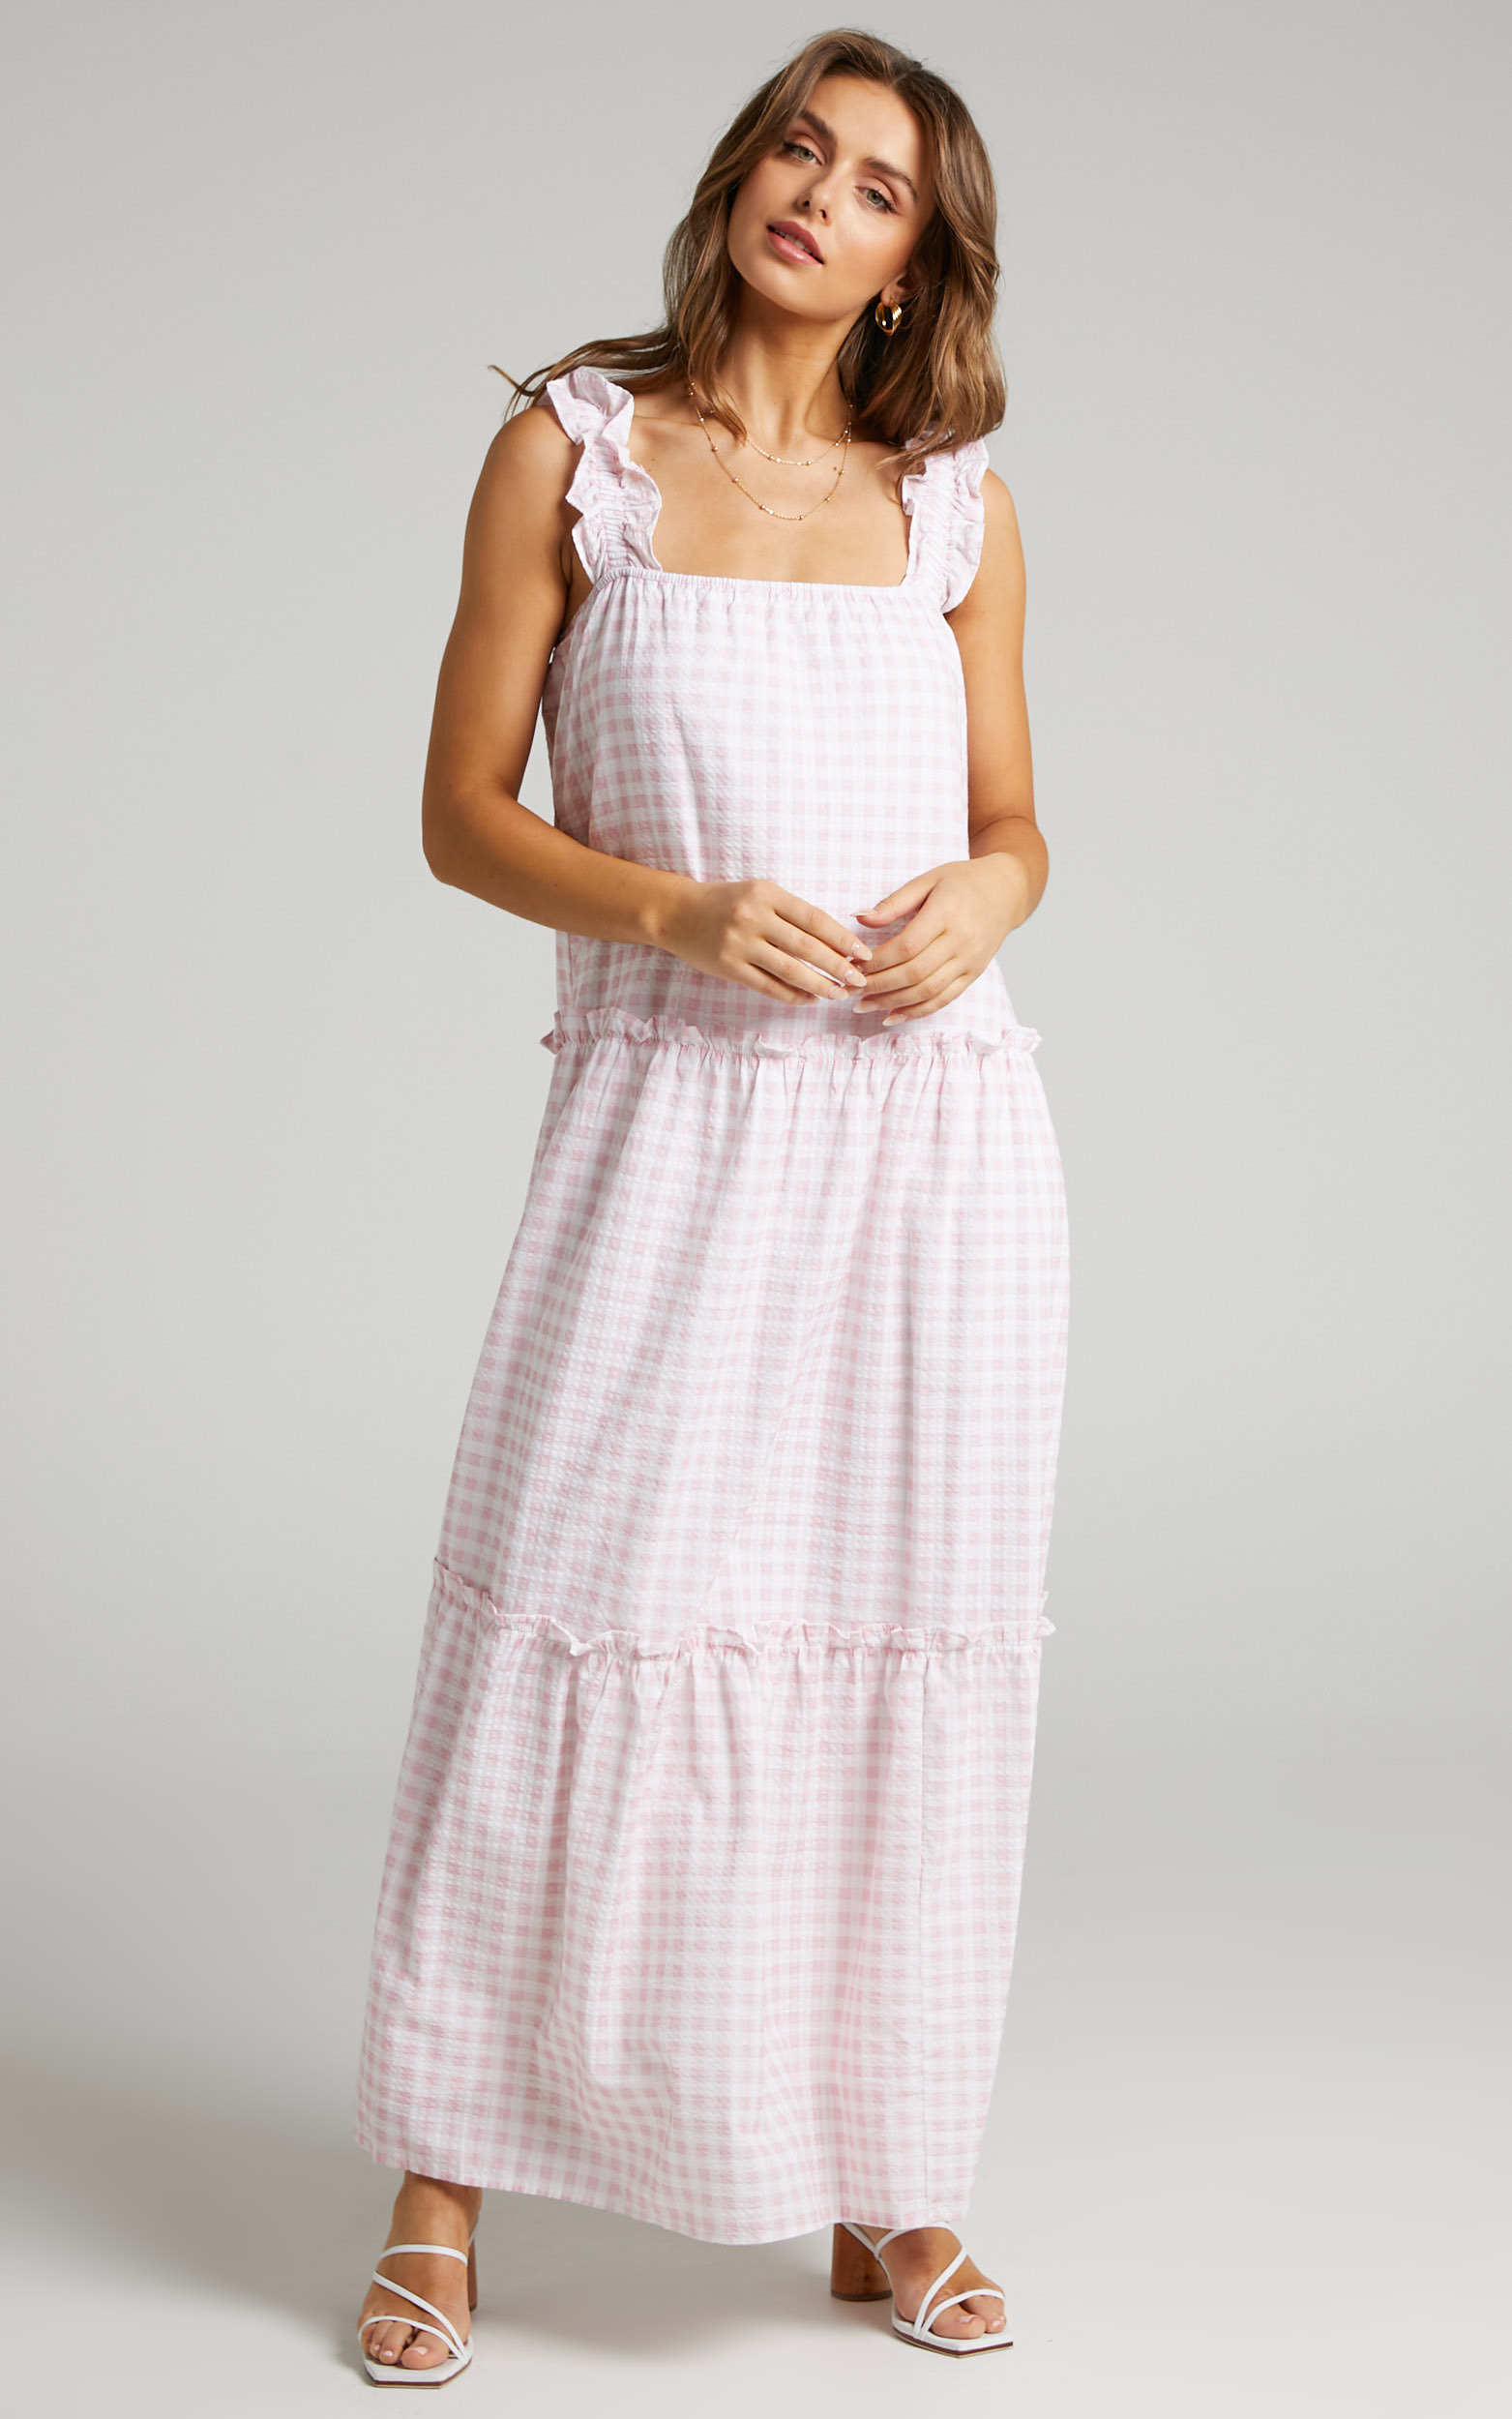 Charlie Holiday - Lottie Maxi Dress in Pink Gingham - L, PNK1, hi-res image number null